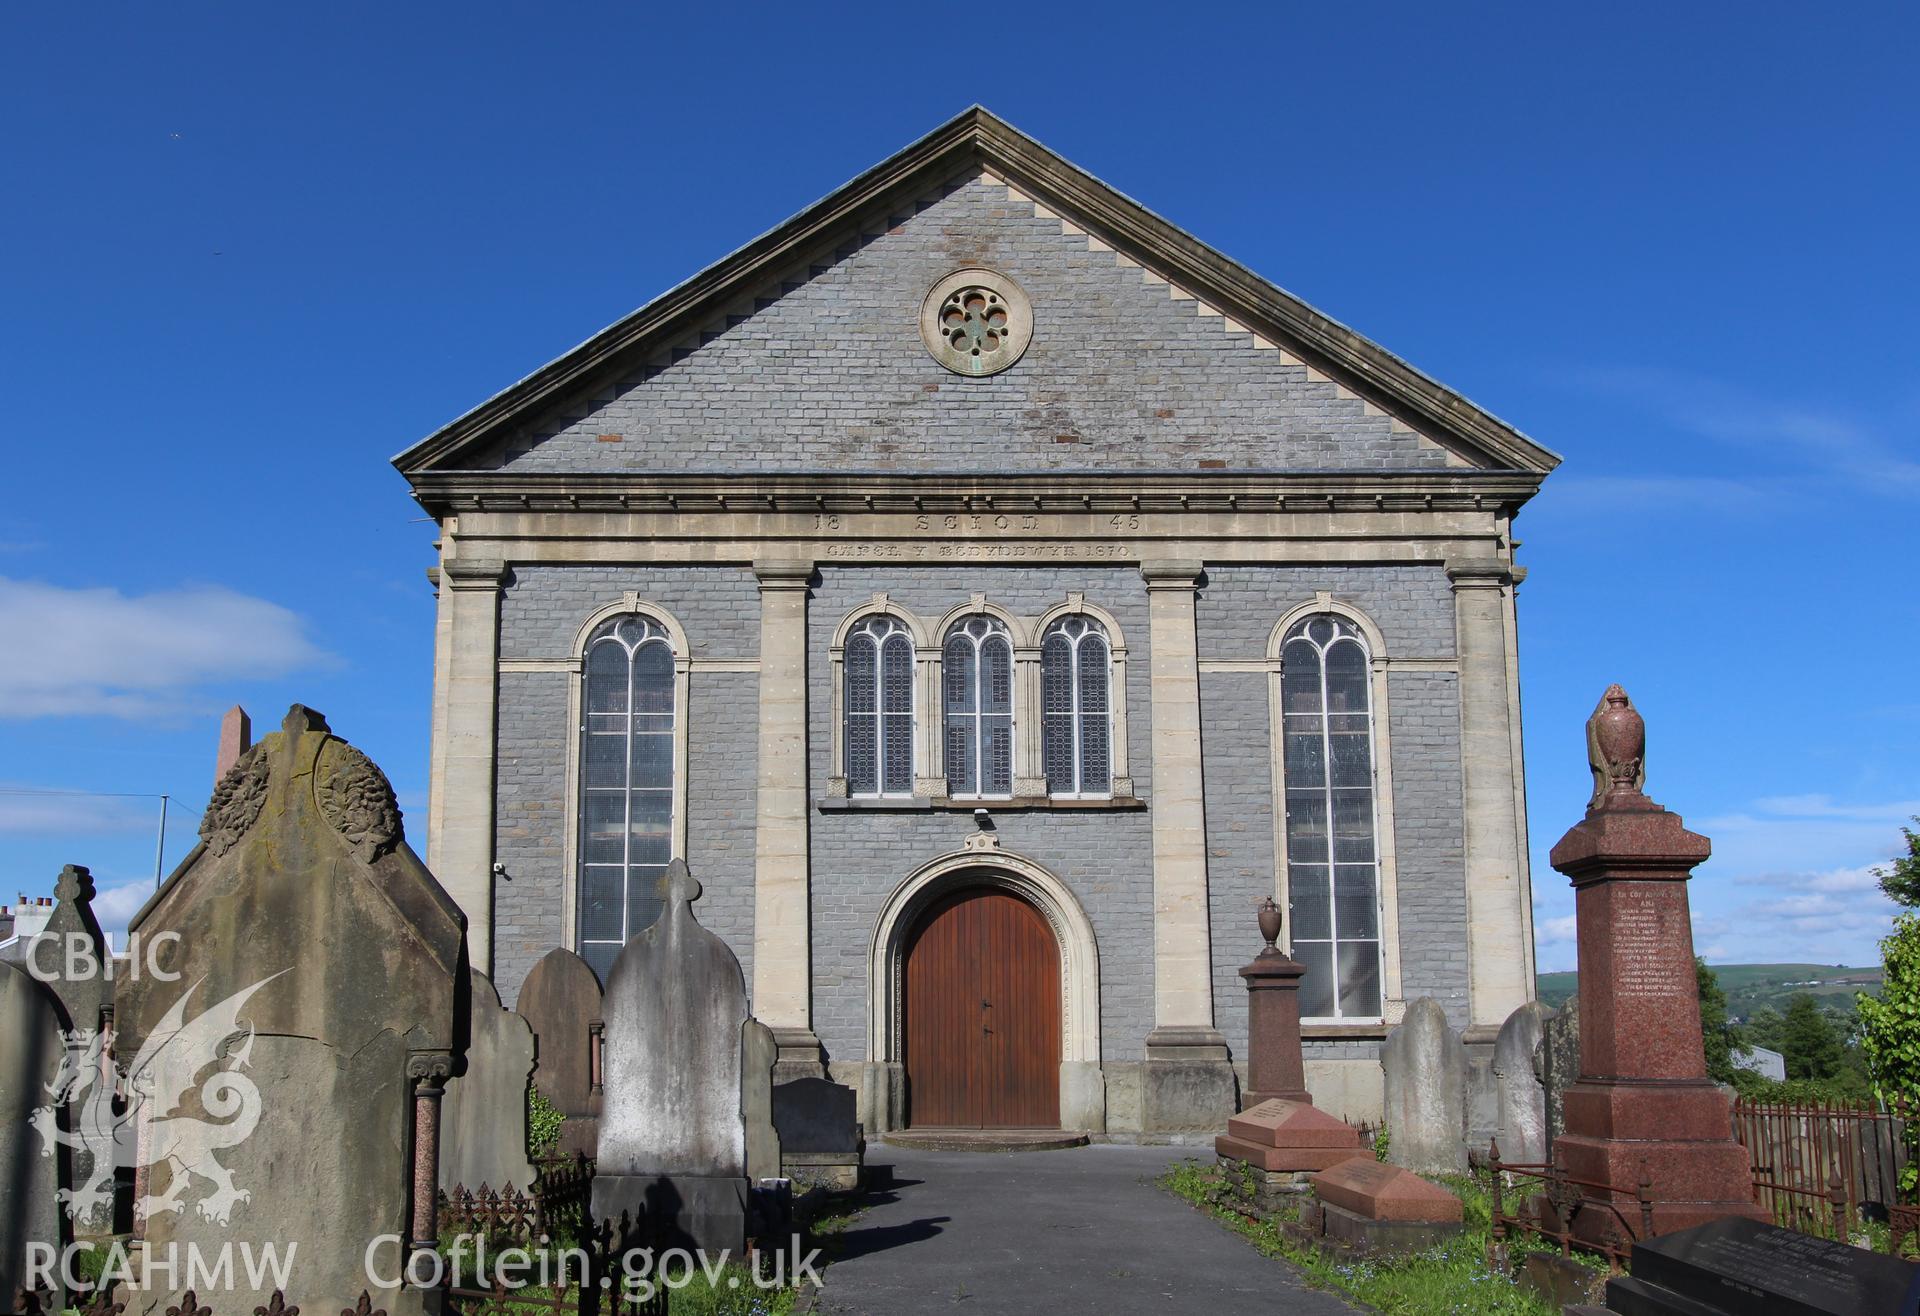 Exterior view of graveyard and chapel's front facade. Inscription beneath tympanum reads: '18 Seion 45/ CAPEL Y BEDYDDWYR 1870. Photographic survey of Seion Welsh Baptist Chapel, Morriston, conducted by Sue Fielding on 13th May 2017.